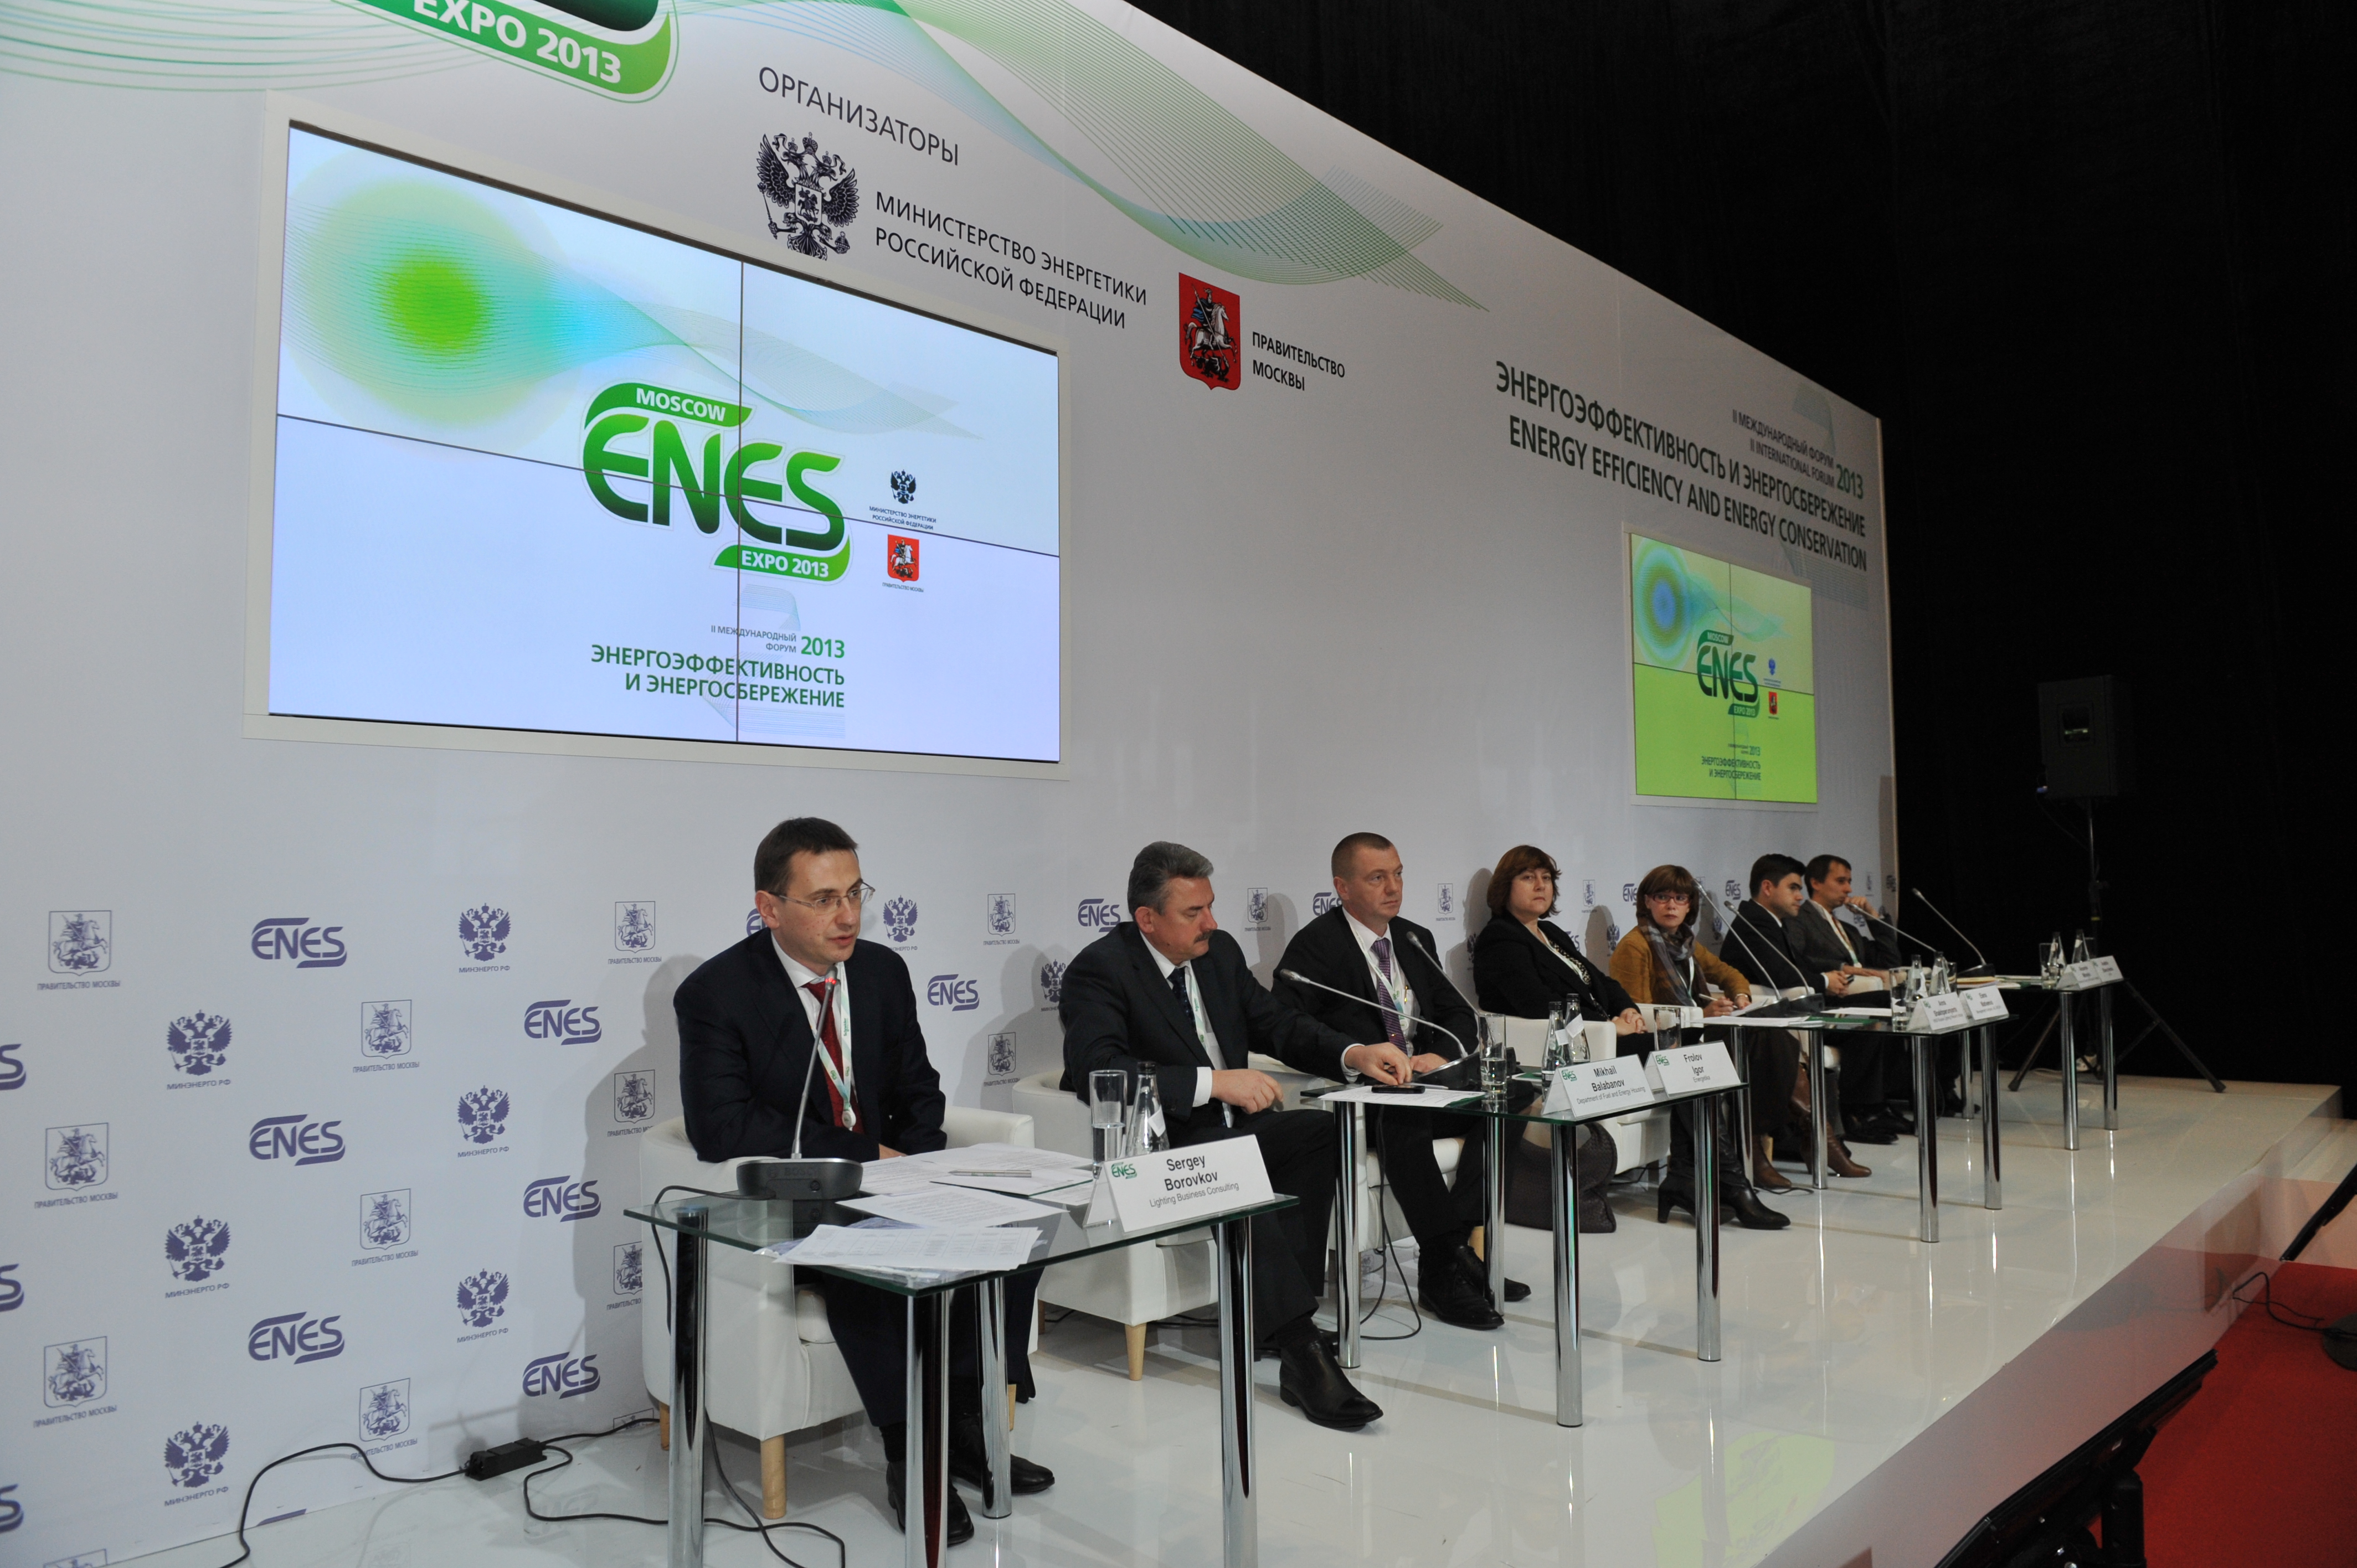 Round Table «Energy Efficient Lighting: Regulation and Incentives» held as part of the ENES 2013 Forum